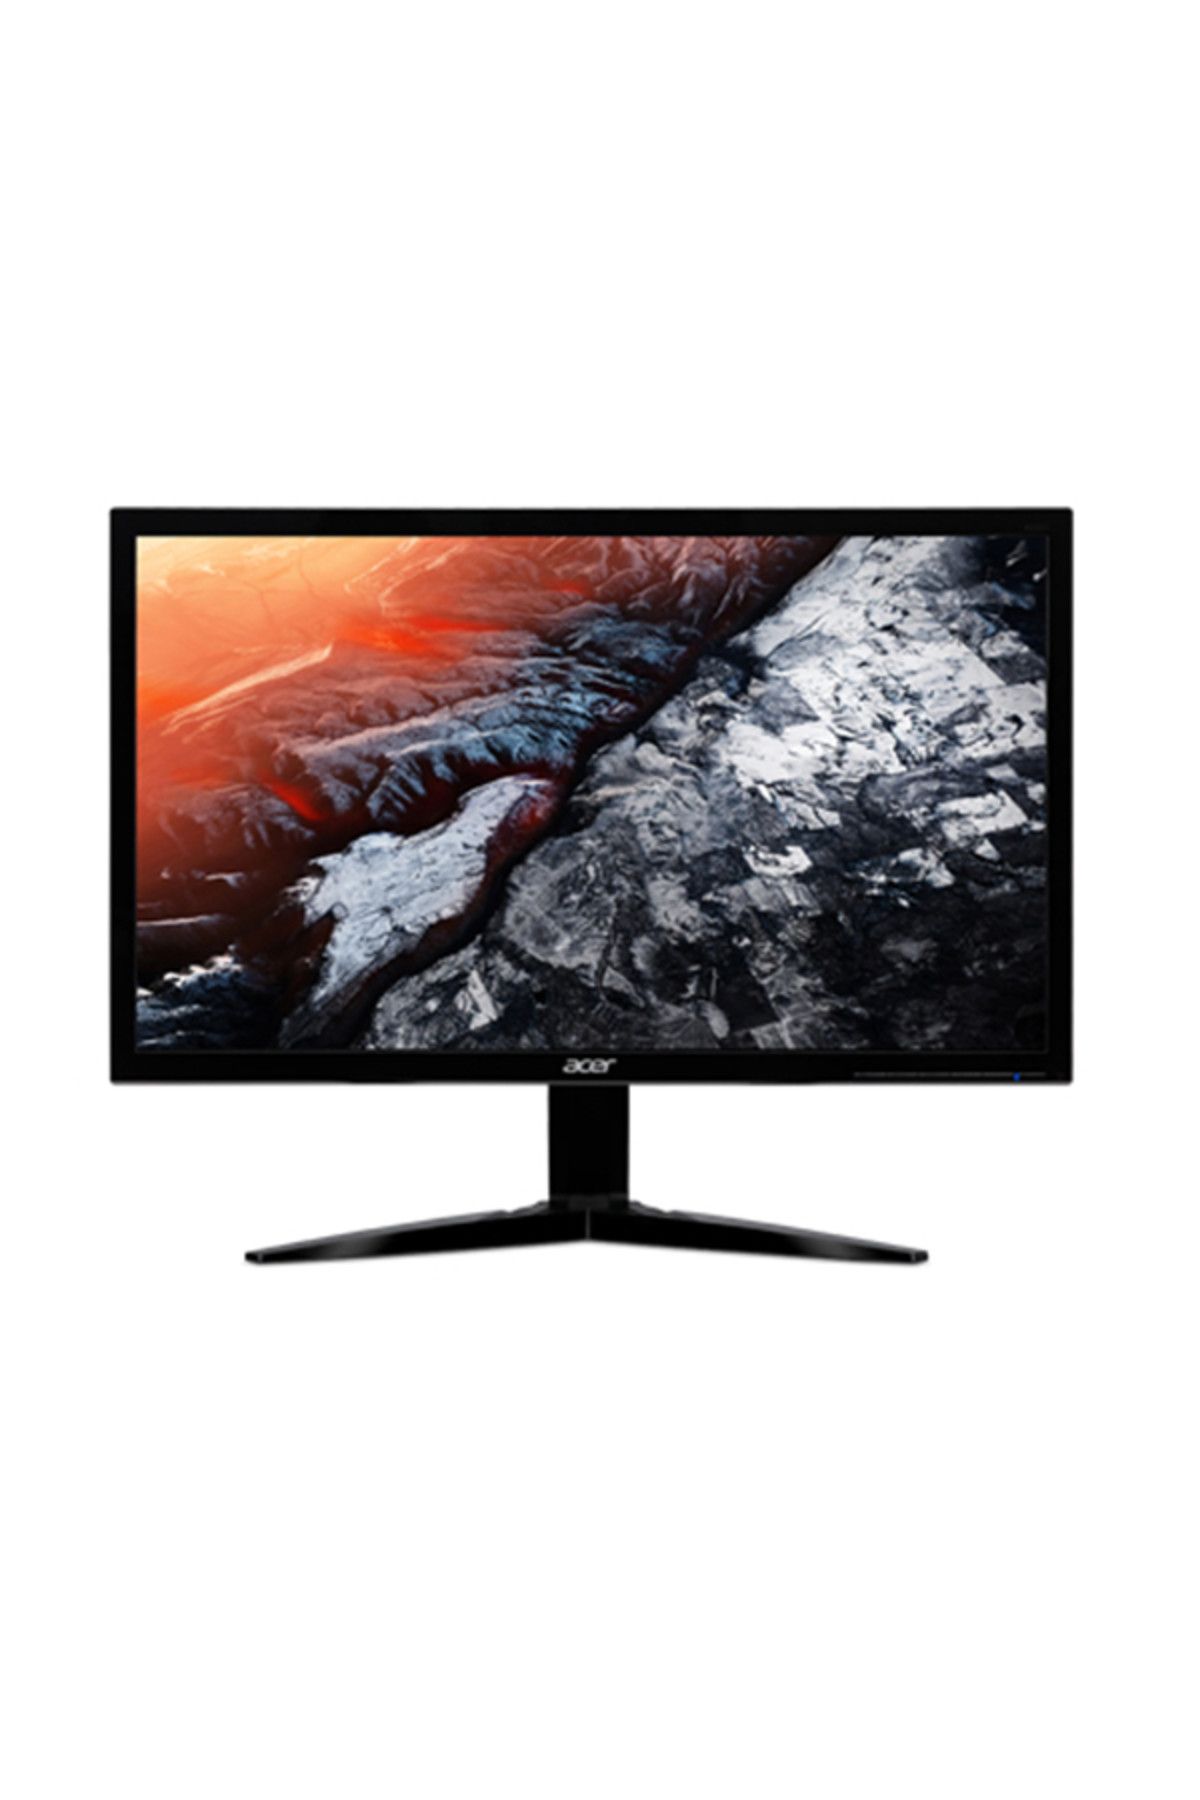 ACER 21.5 ACER KG221QBMIX FULL HD LED 1MS FREESYNC 100M:1 250 NITS VGA HDMI AUDIO IN/OUT MM VESA MONITOR